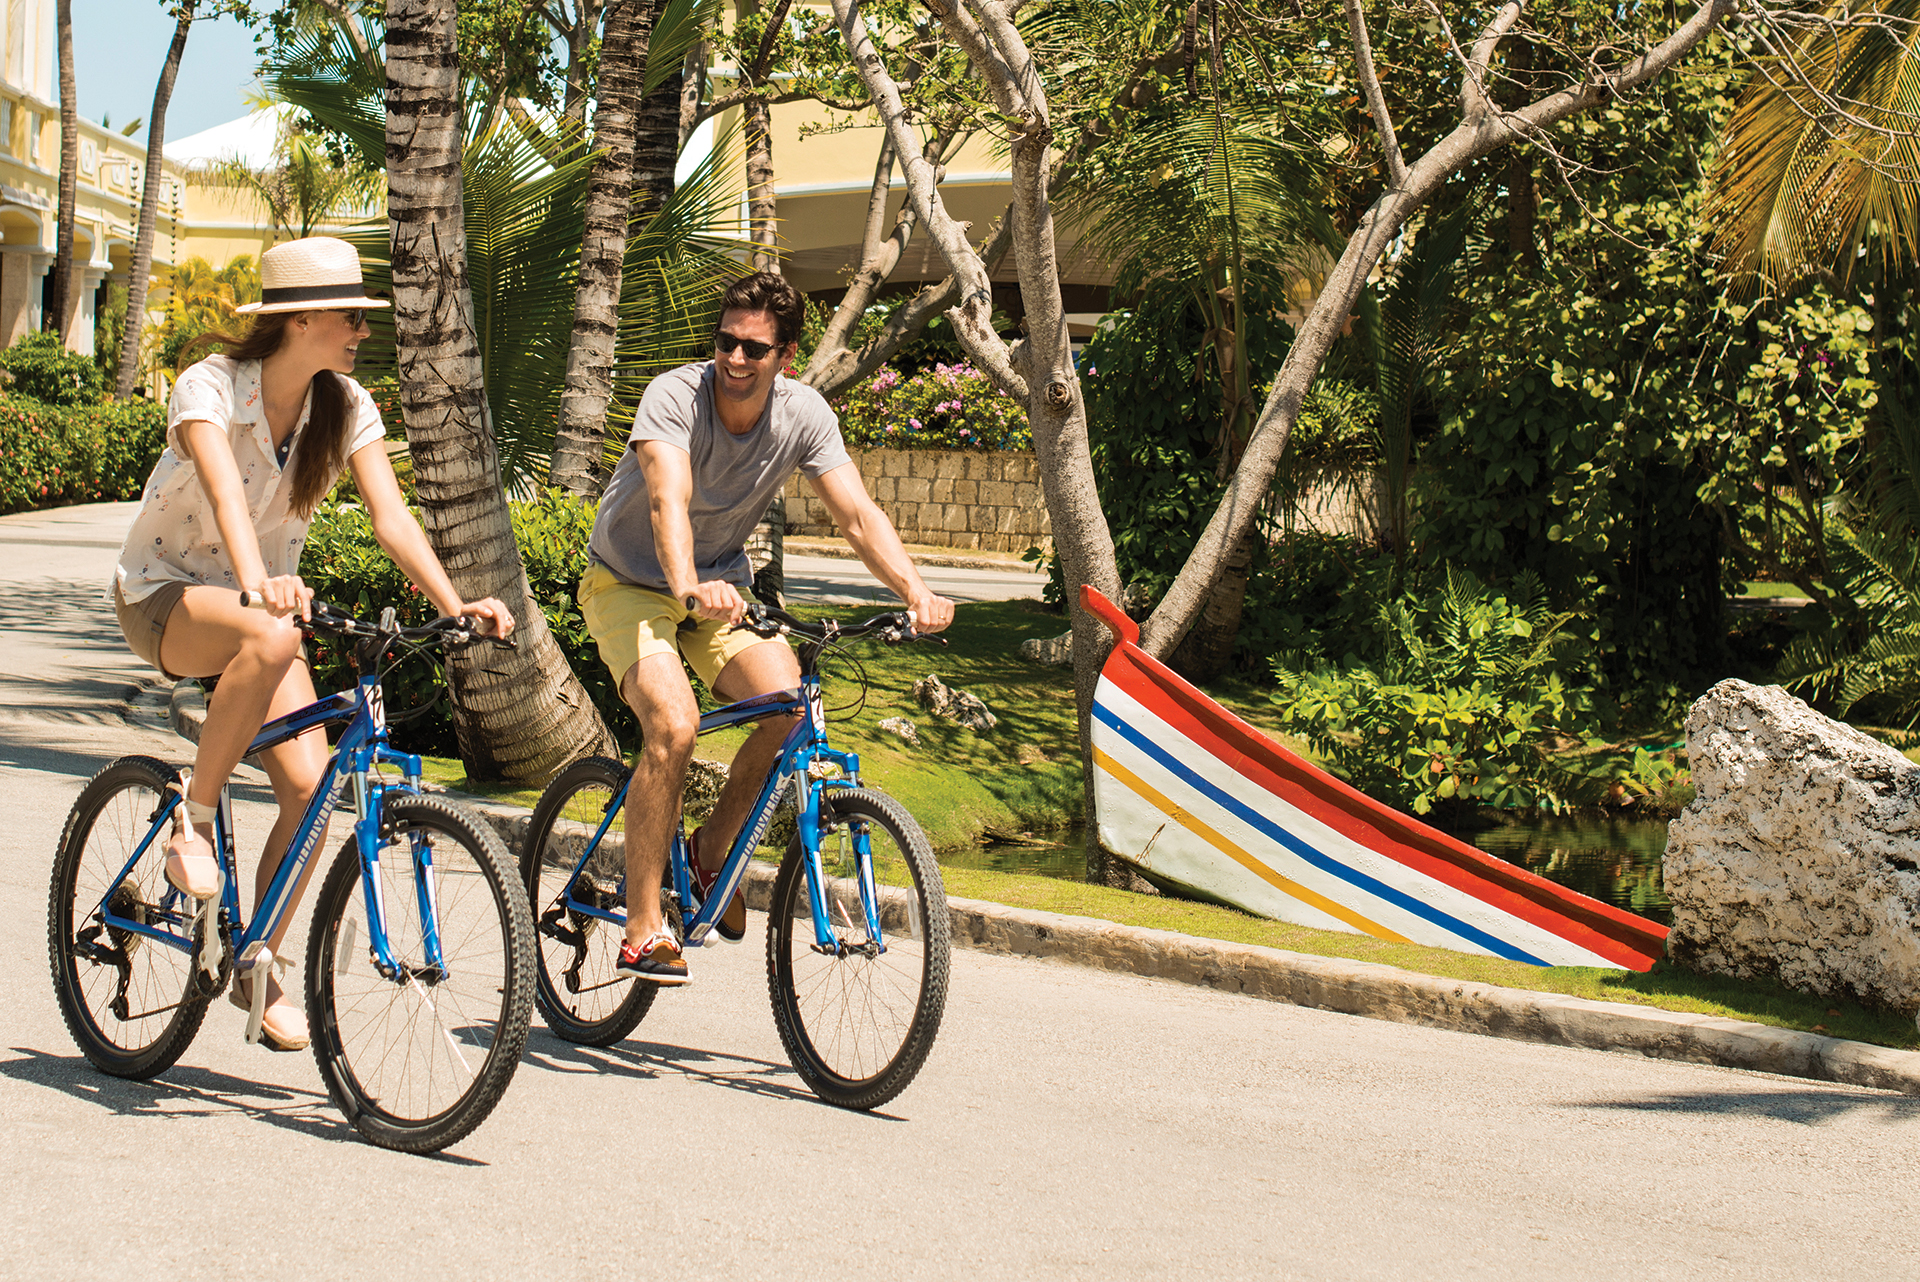 Biking through Cancun to explore the area and find out what other things there are to do.